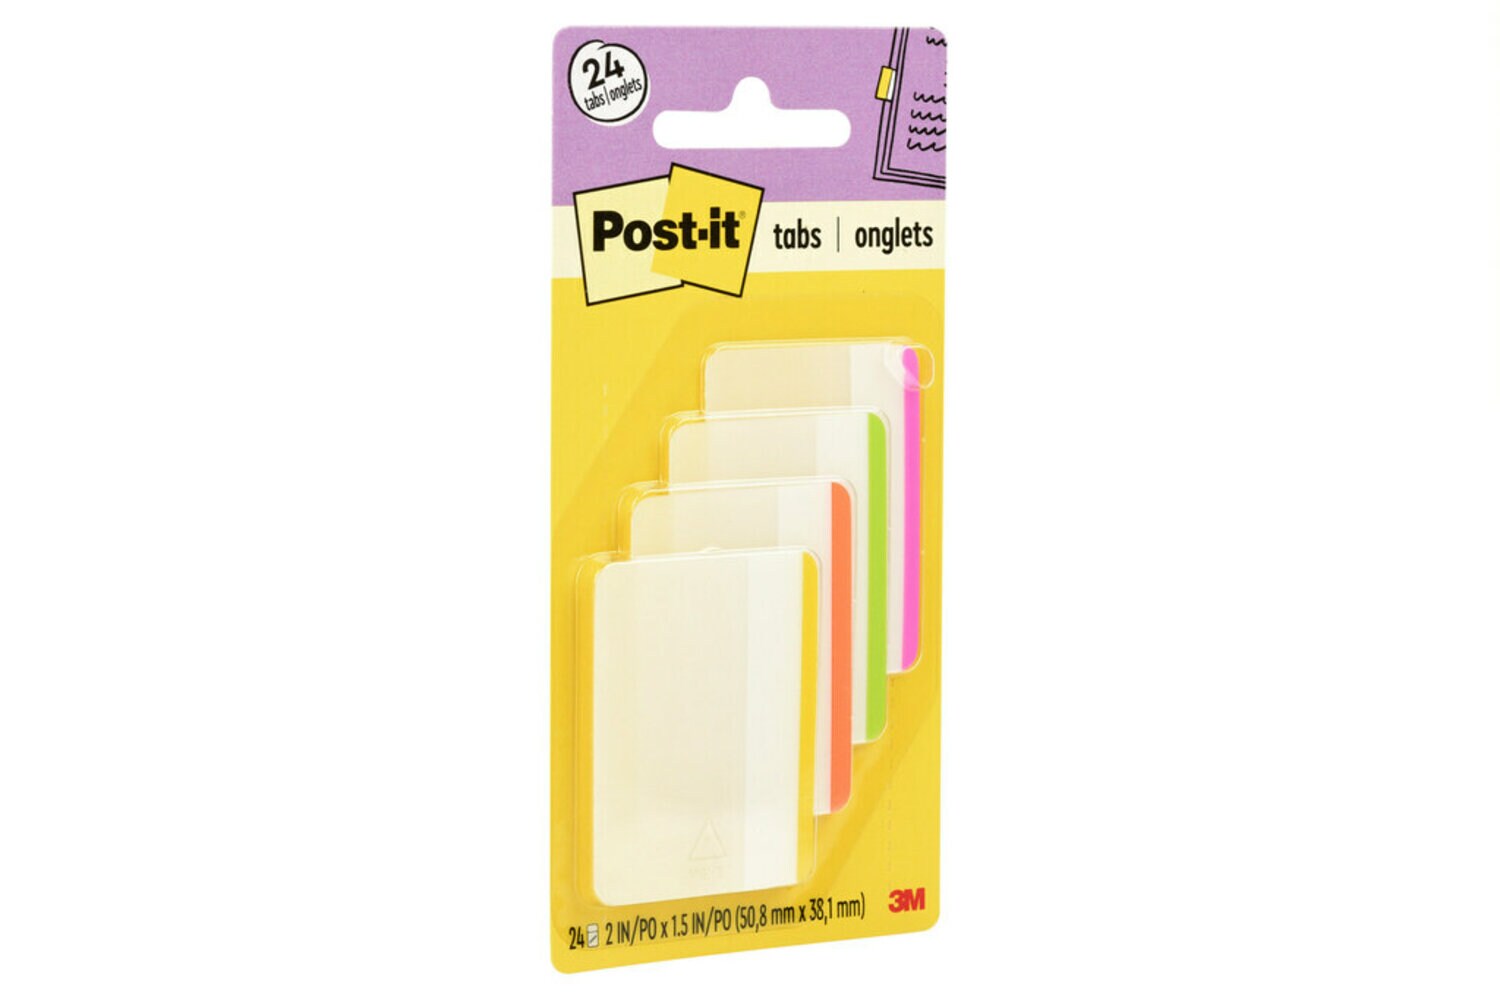 7100095817 - Post-it Durable Tabs 686F-1BB, 2 in. x 1.5 in. (50.8 mm x 38 mm) Beige,
Green, Red, Canary Yellow 24 pk/cs